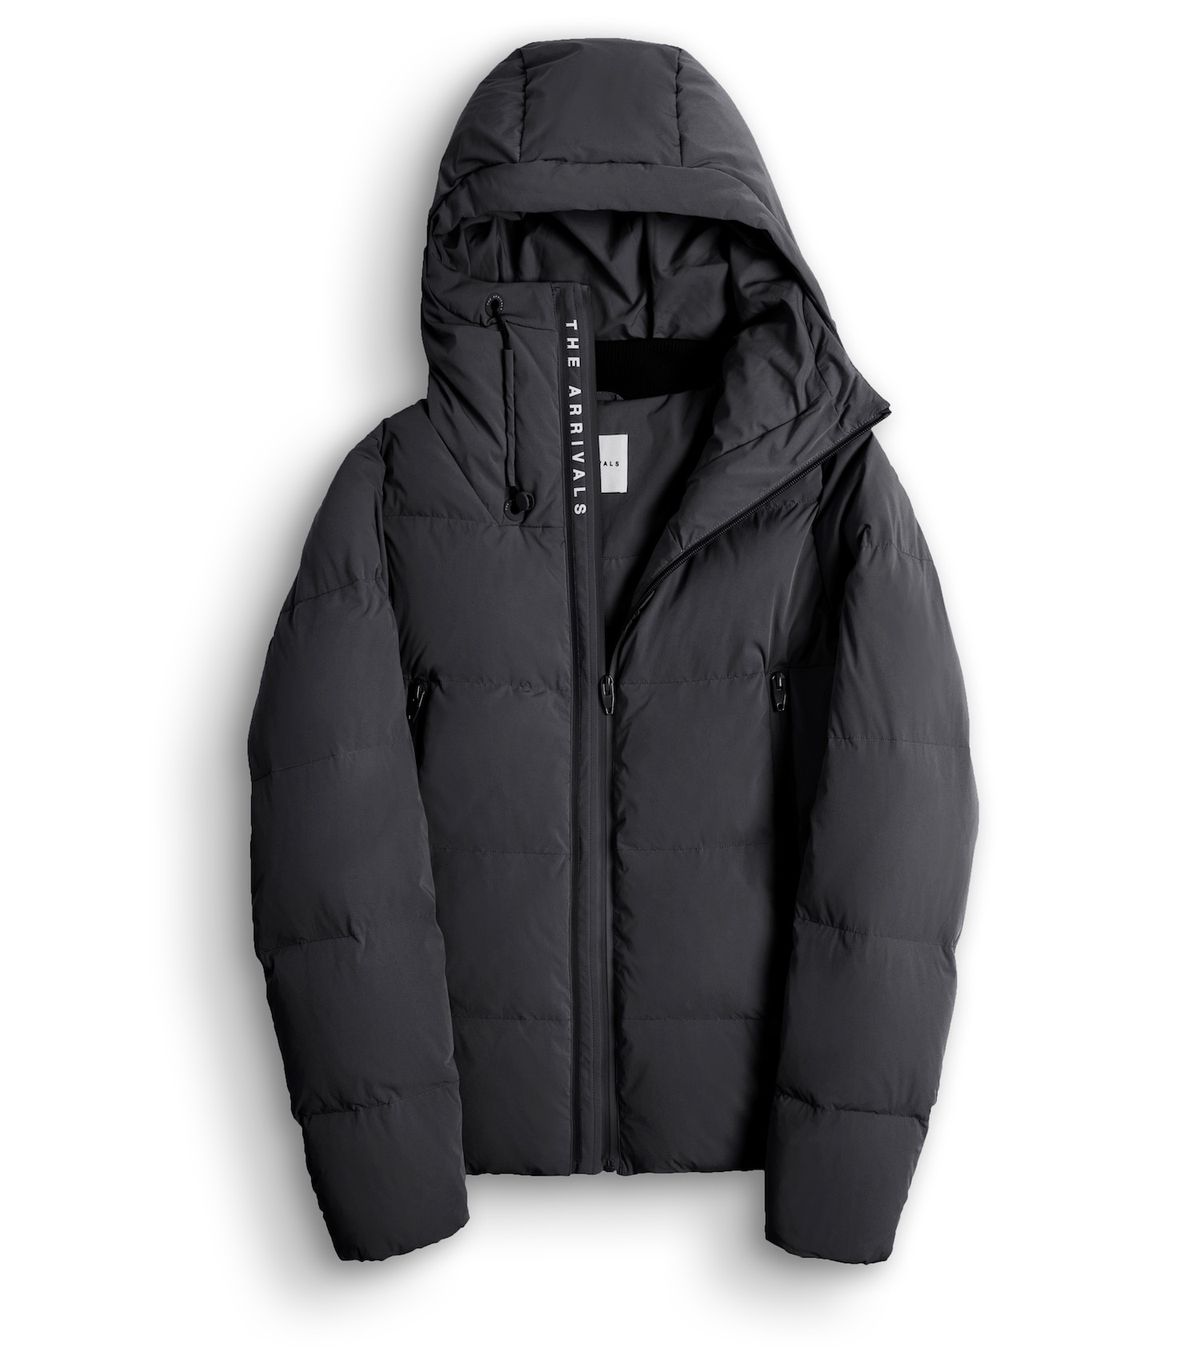 A black puffer jacket by The Arrivals